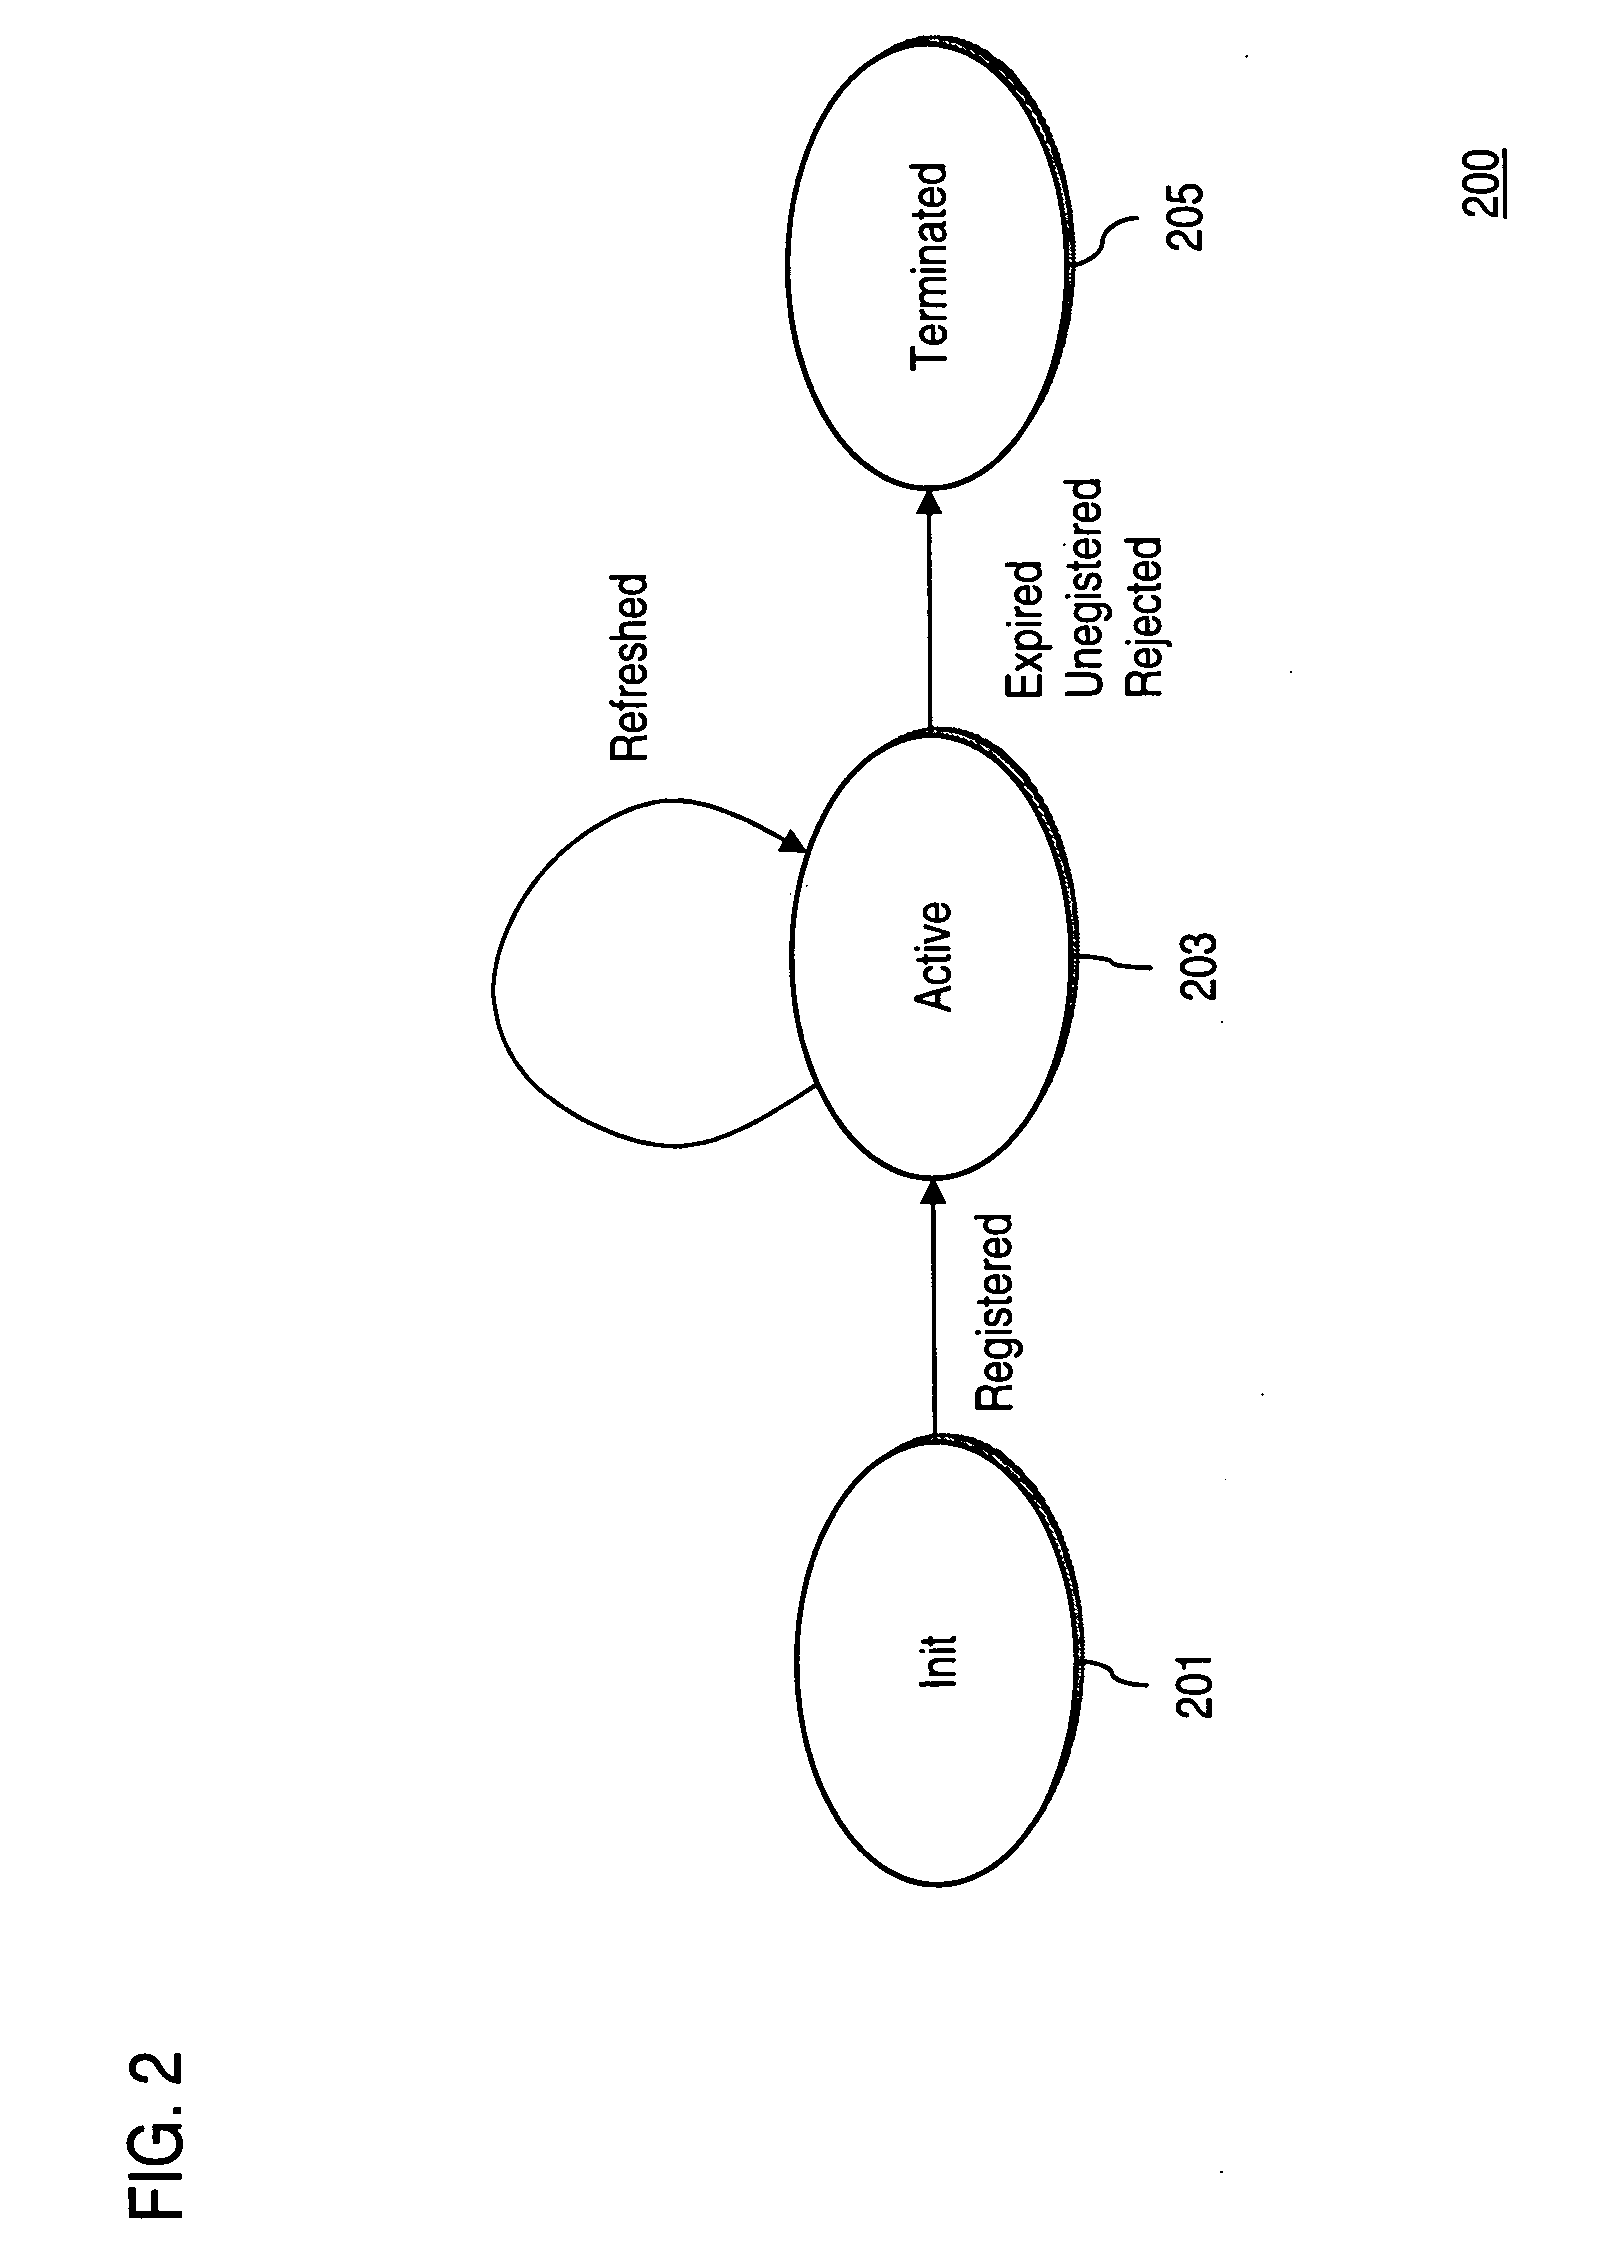 Method and apparatus for providing presence information in support of wireless communication services